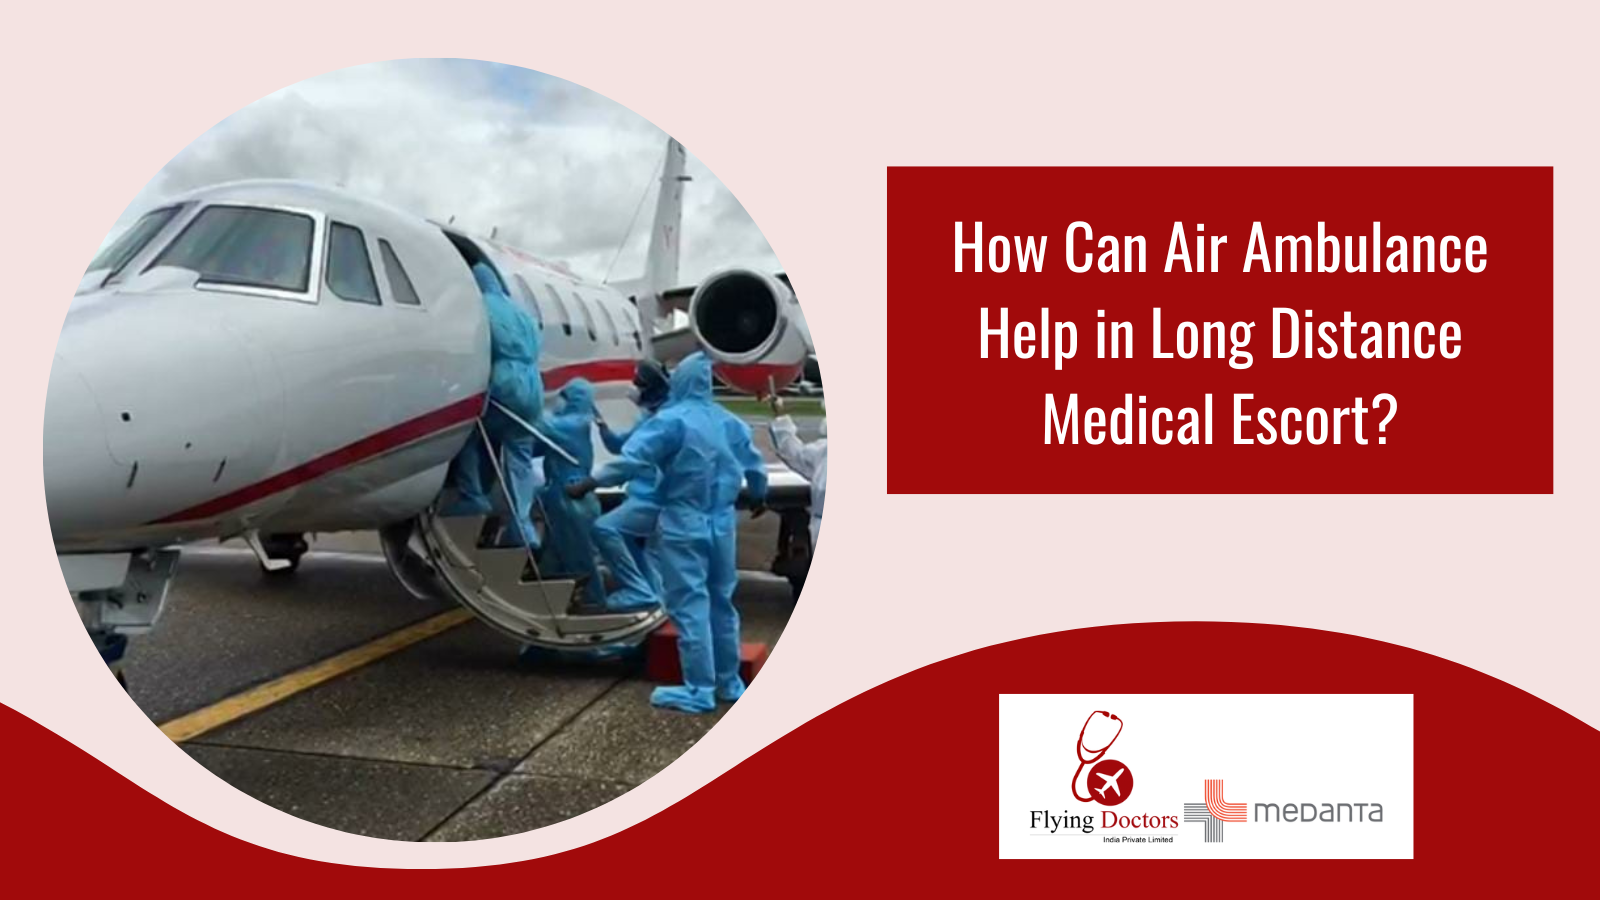 How Can Air Ambulance Help in Long Distance Medical Escort